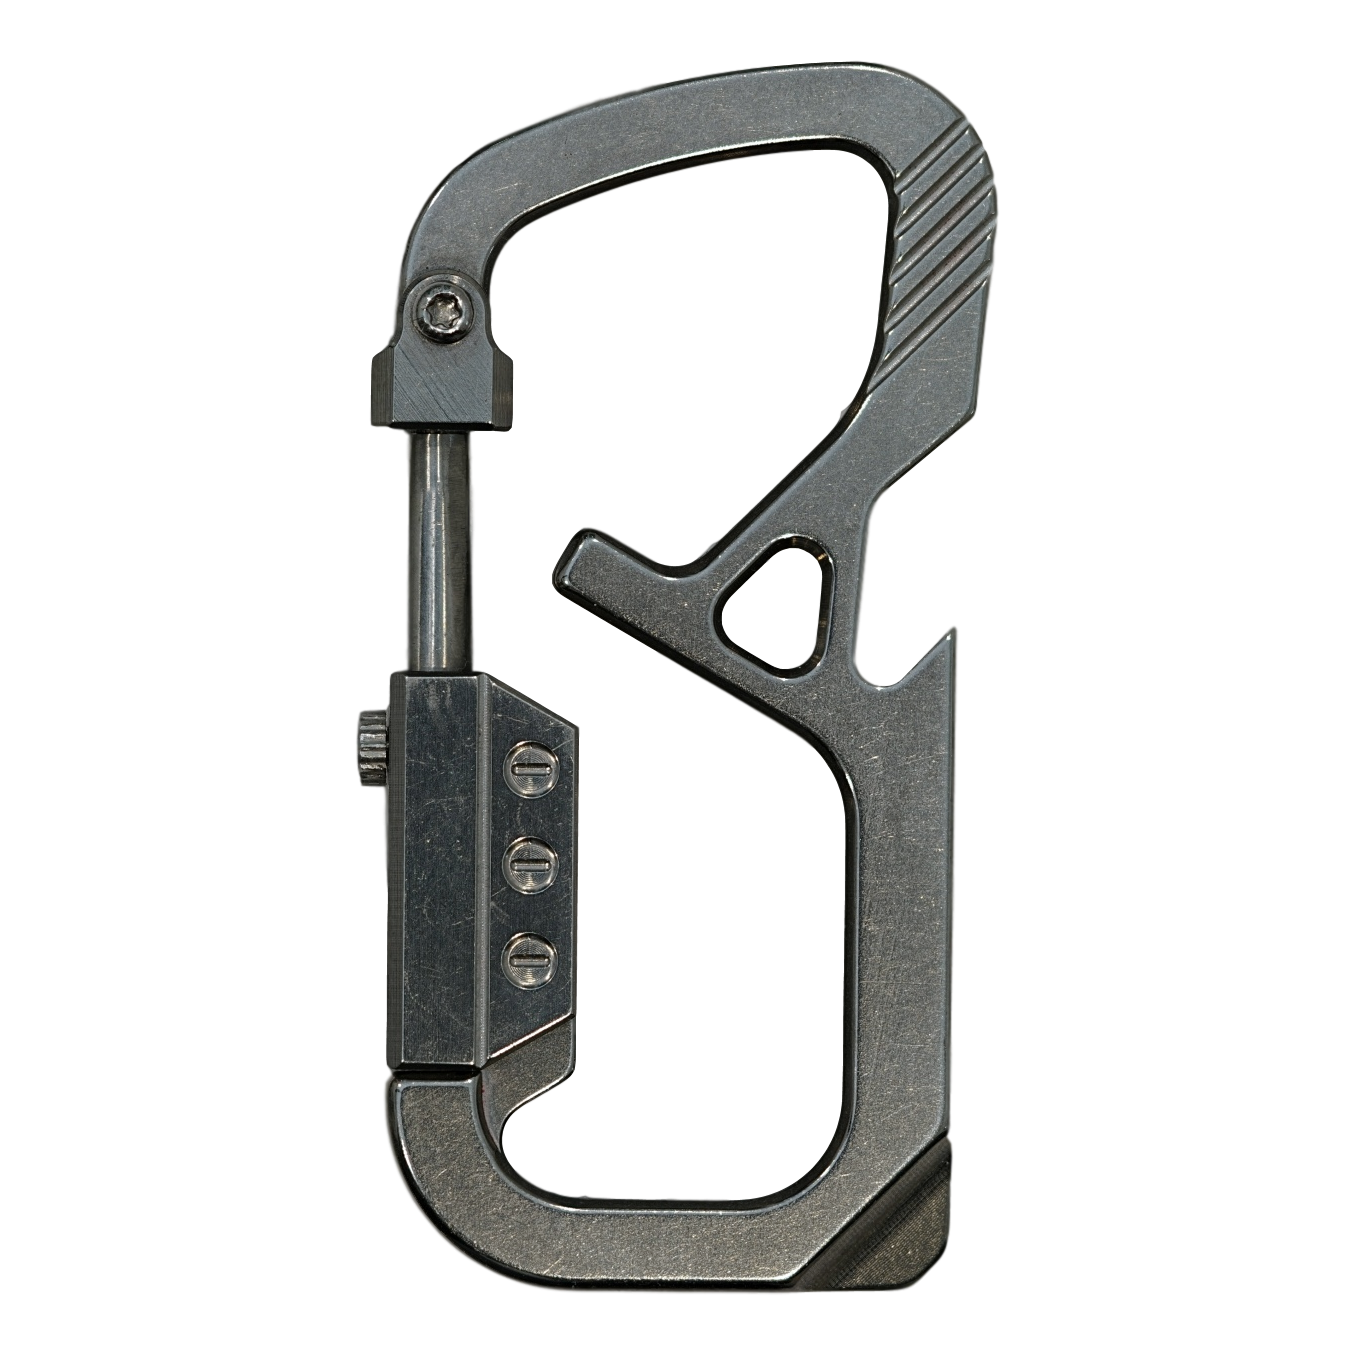 Keep Your Keys Organized with This Titanium Carabiner